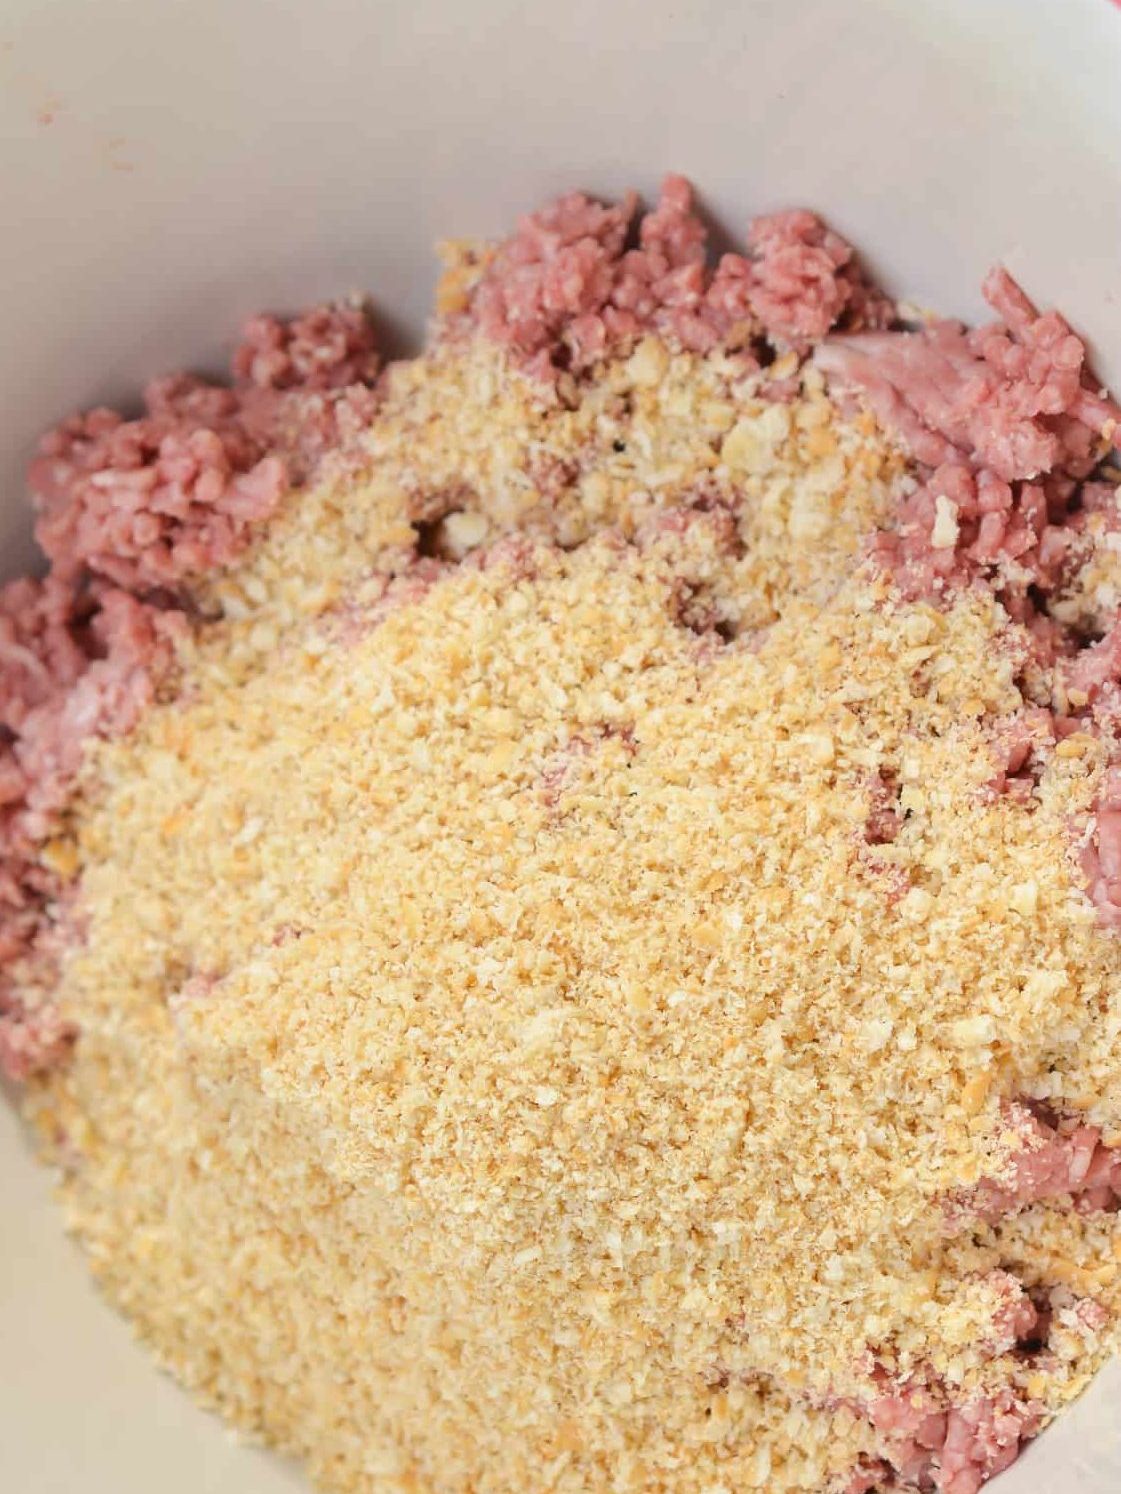 In a mixing bowl, combine 2 lbs ground beef and 25 ritz cracker crumbs.